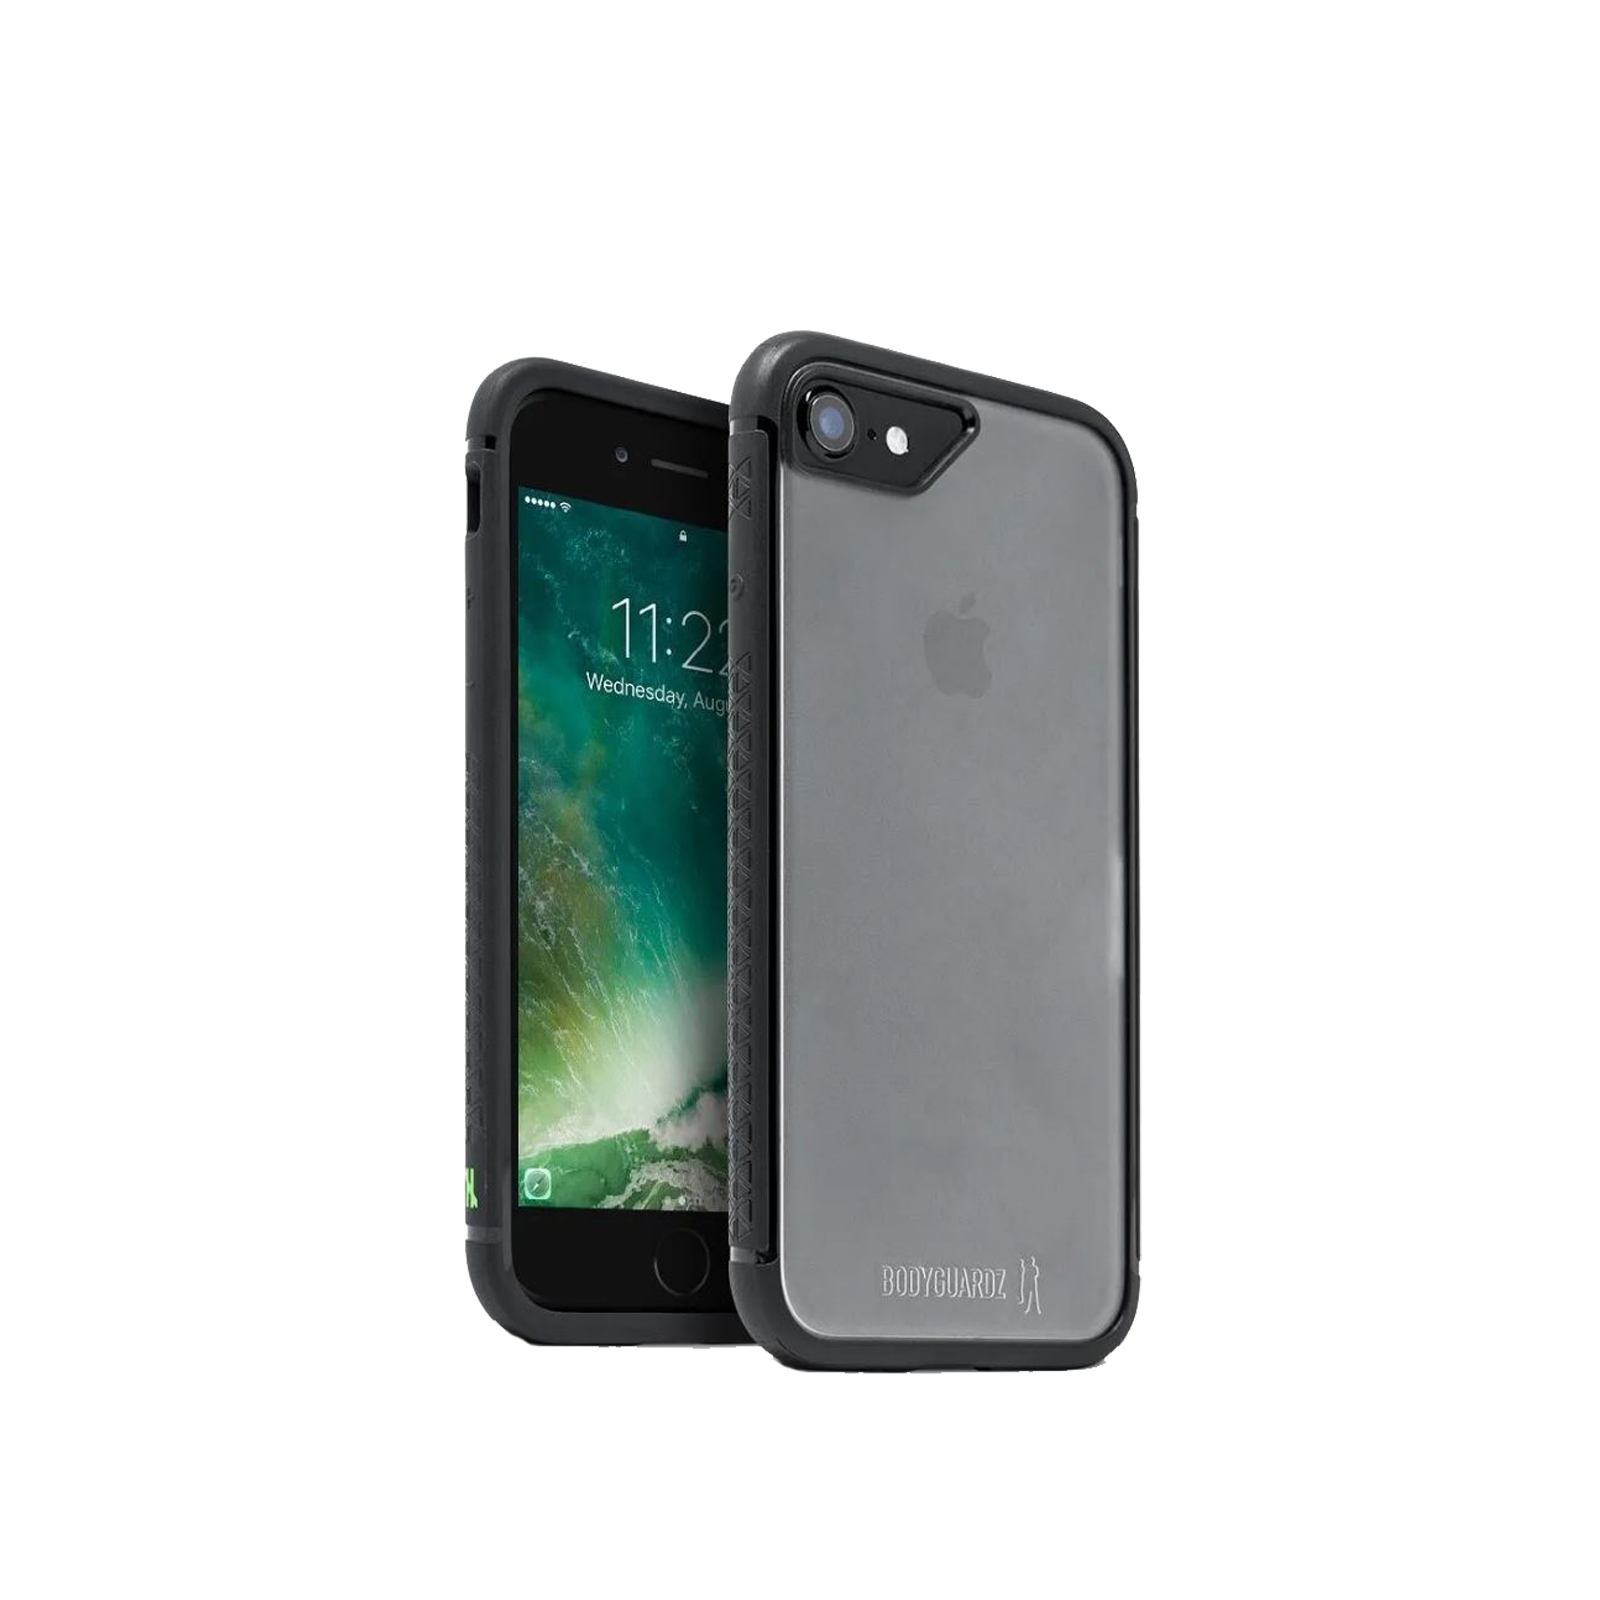 Contact iPhone 6 / 7 / 8 Case [Black]